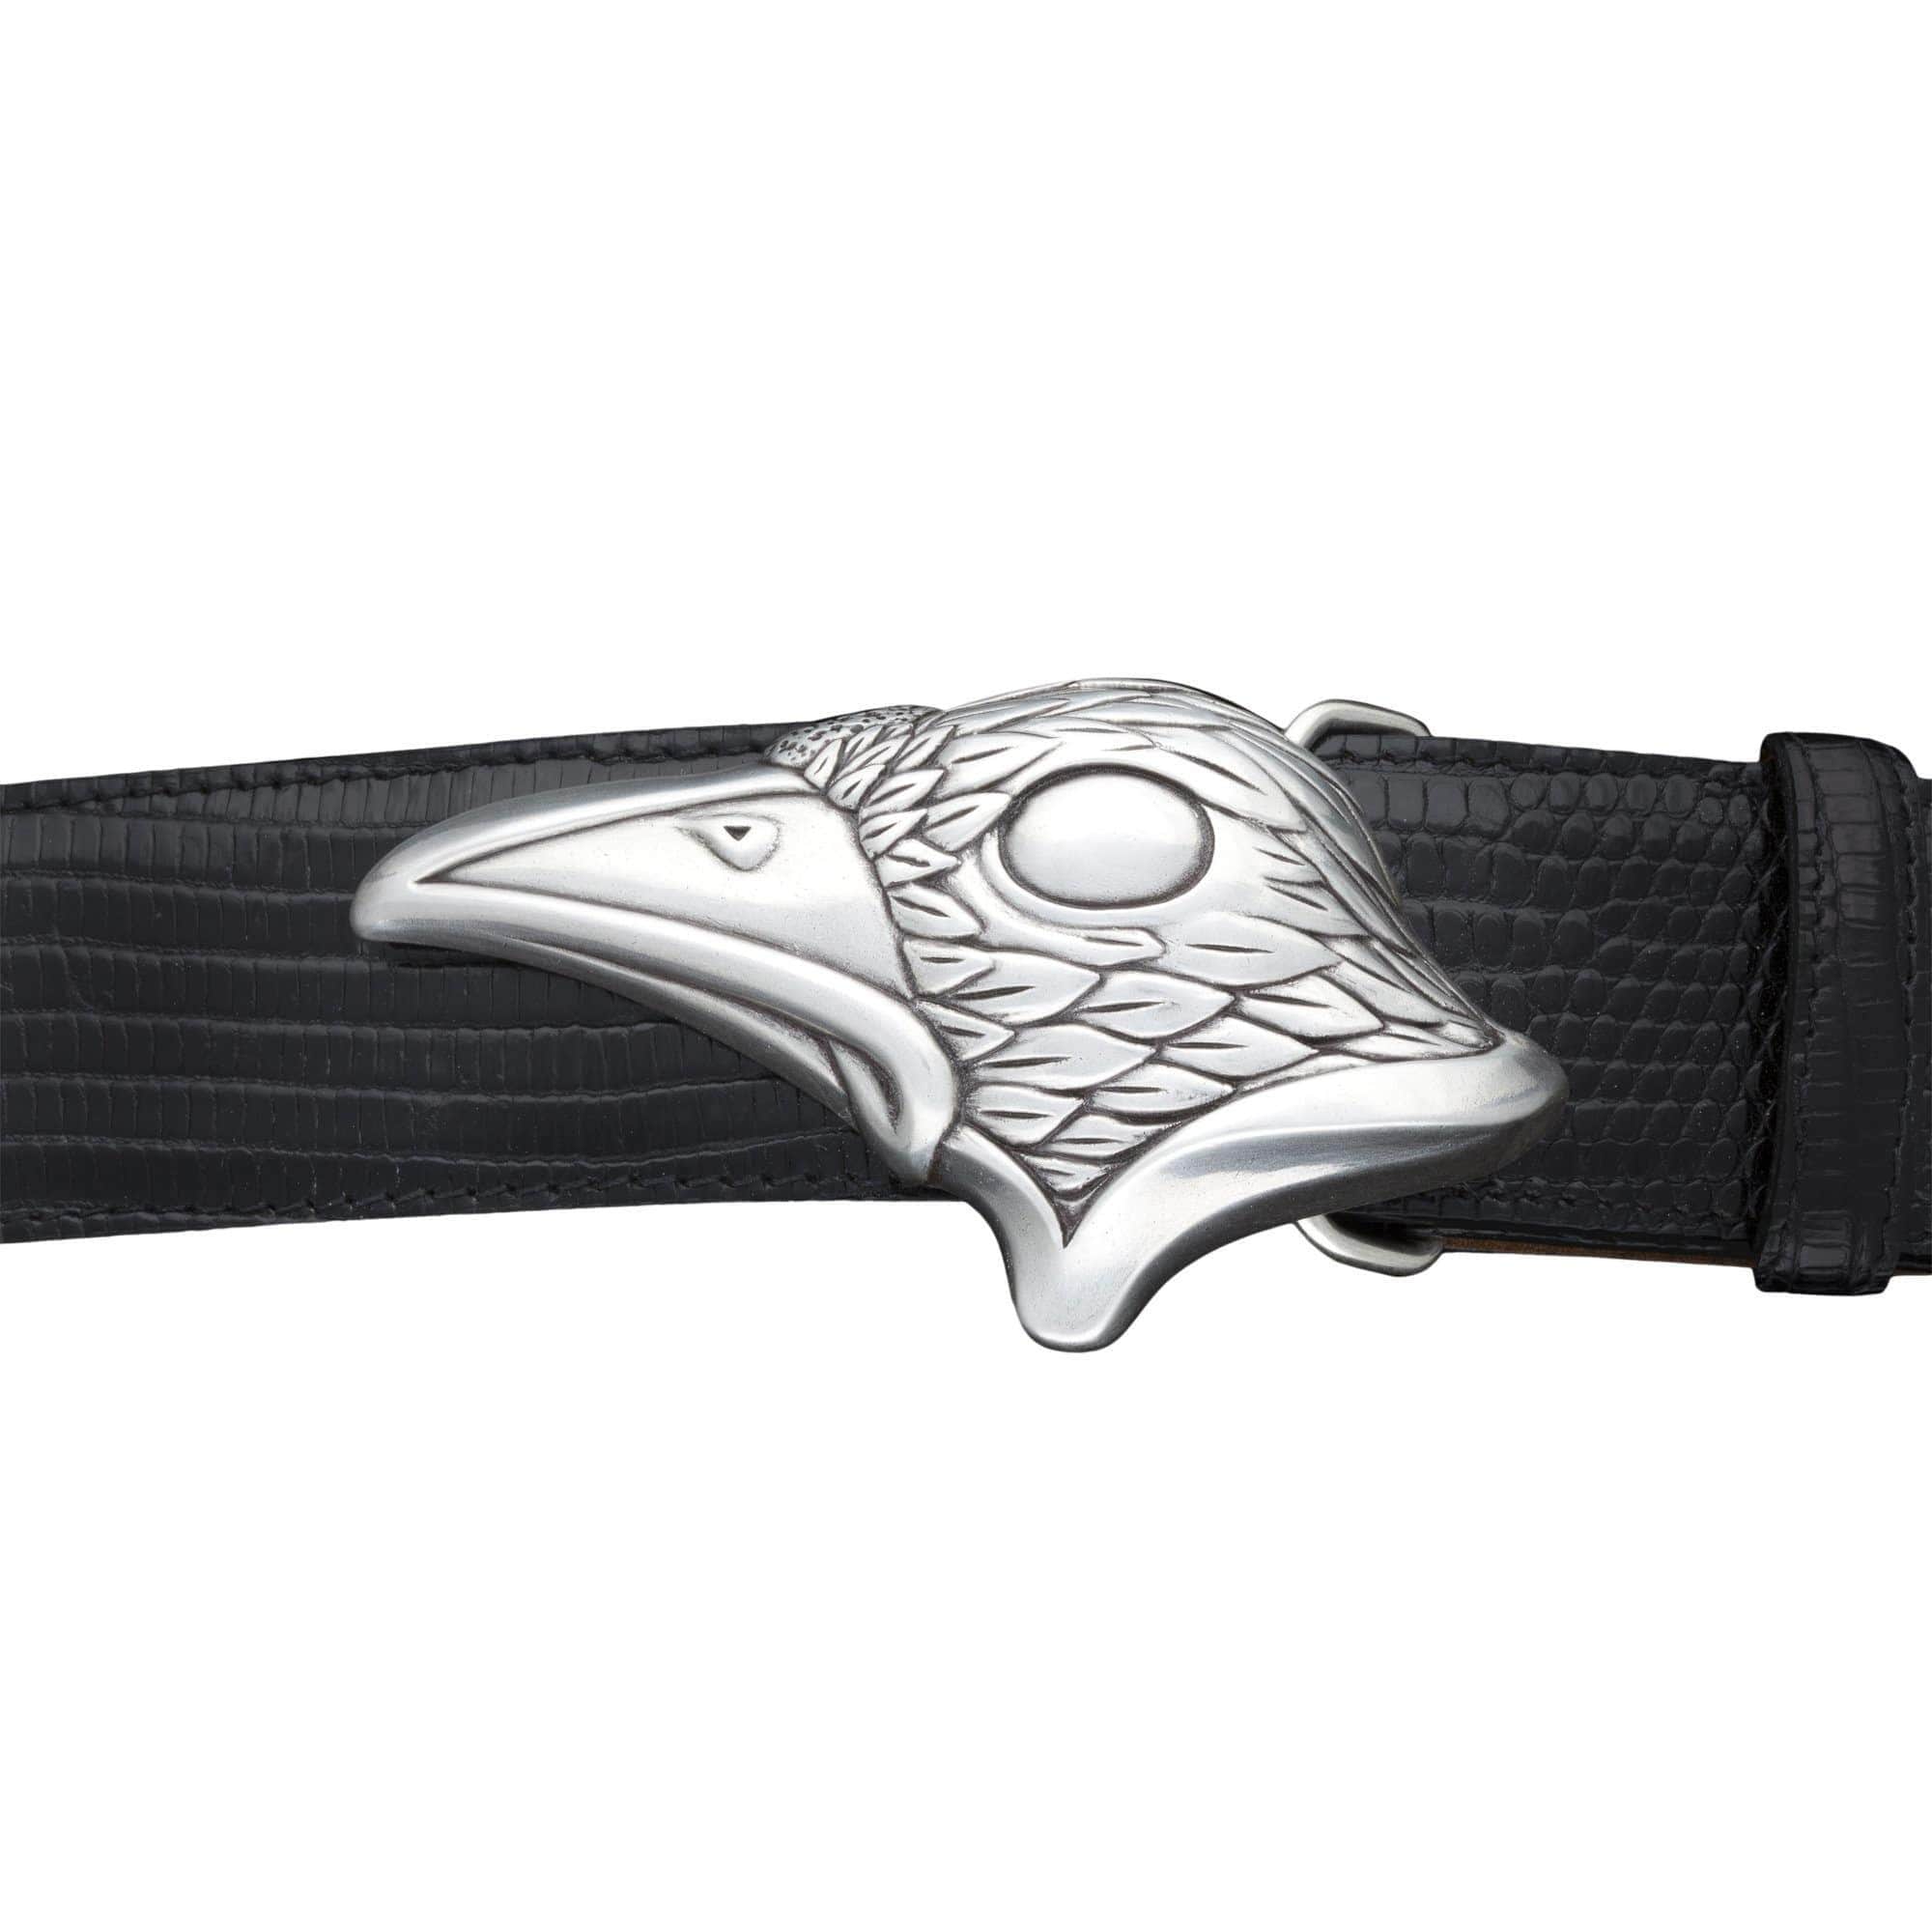 Kalifano Buckles KB40-10657AS - Kalifano Buckle 40mm Raven- Antique Silver KB40-10657AS